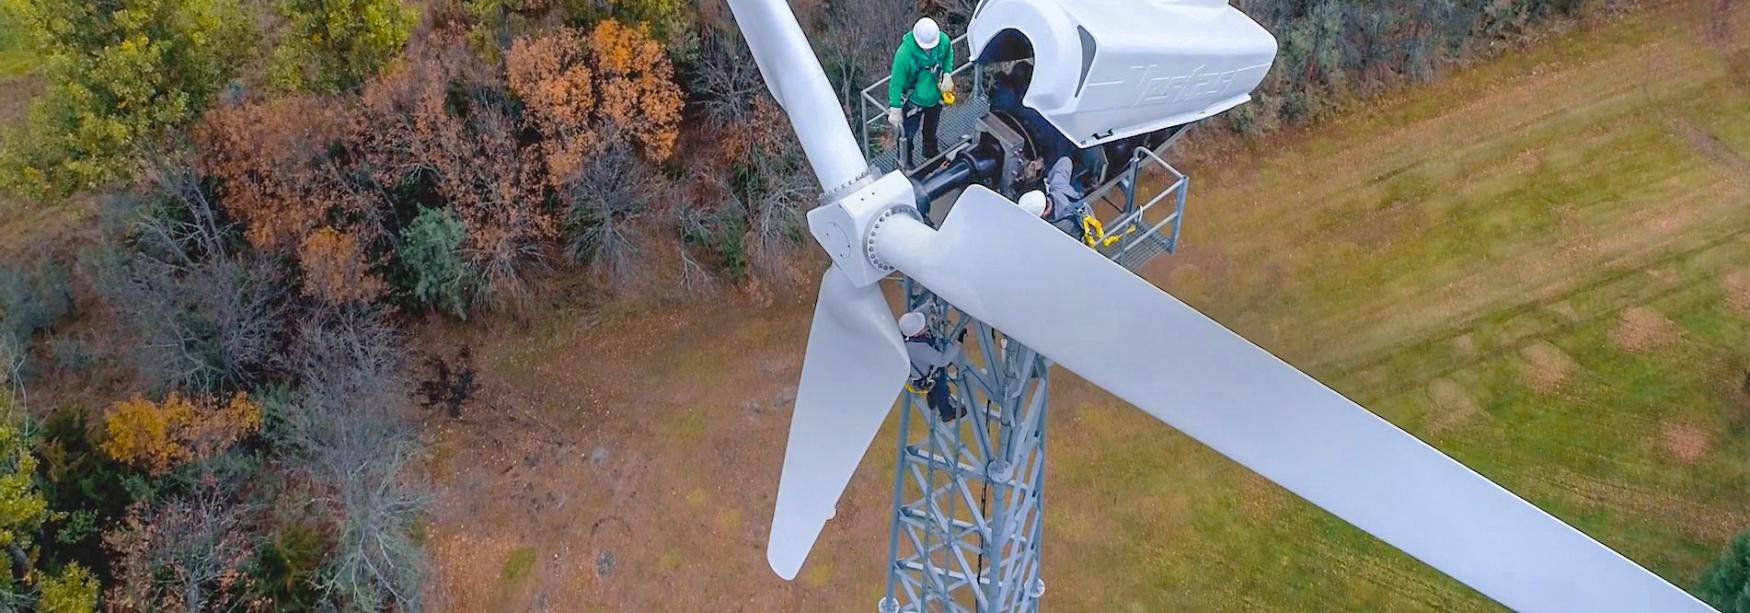 Workers servicing a wind turbine.